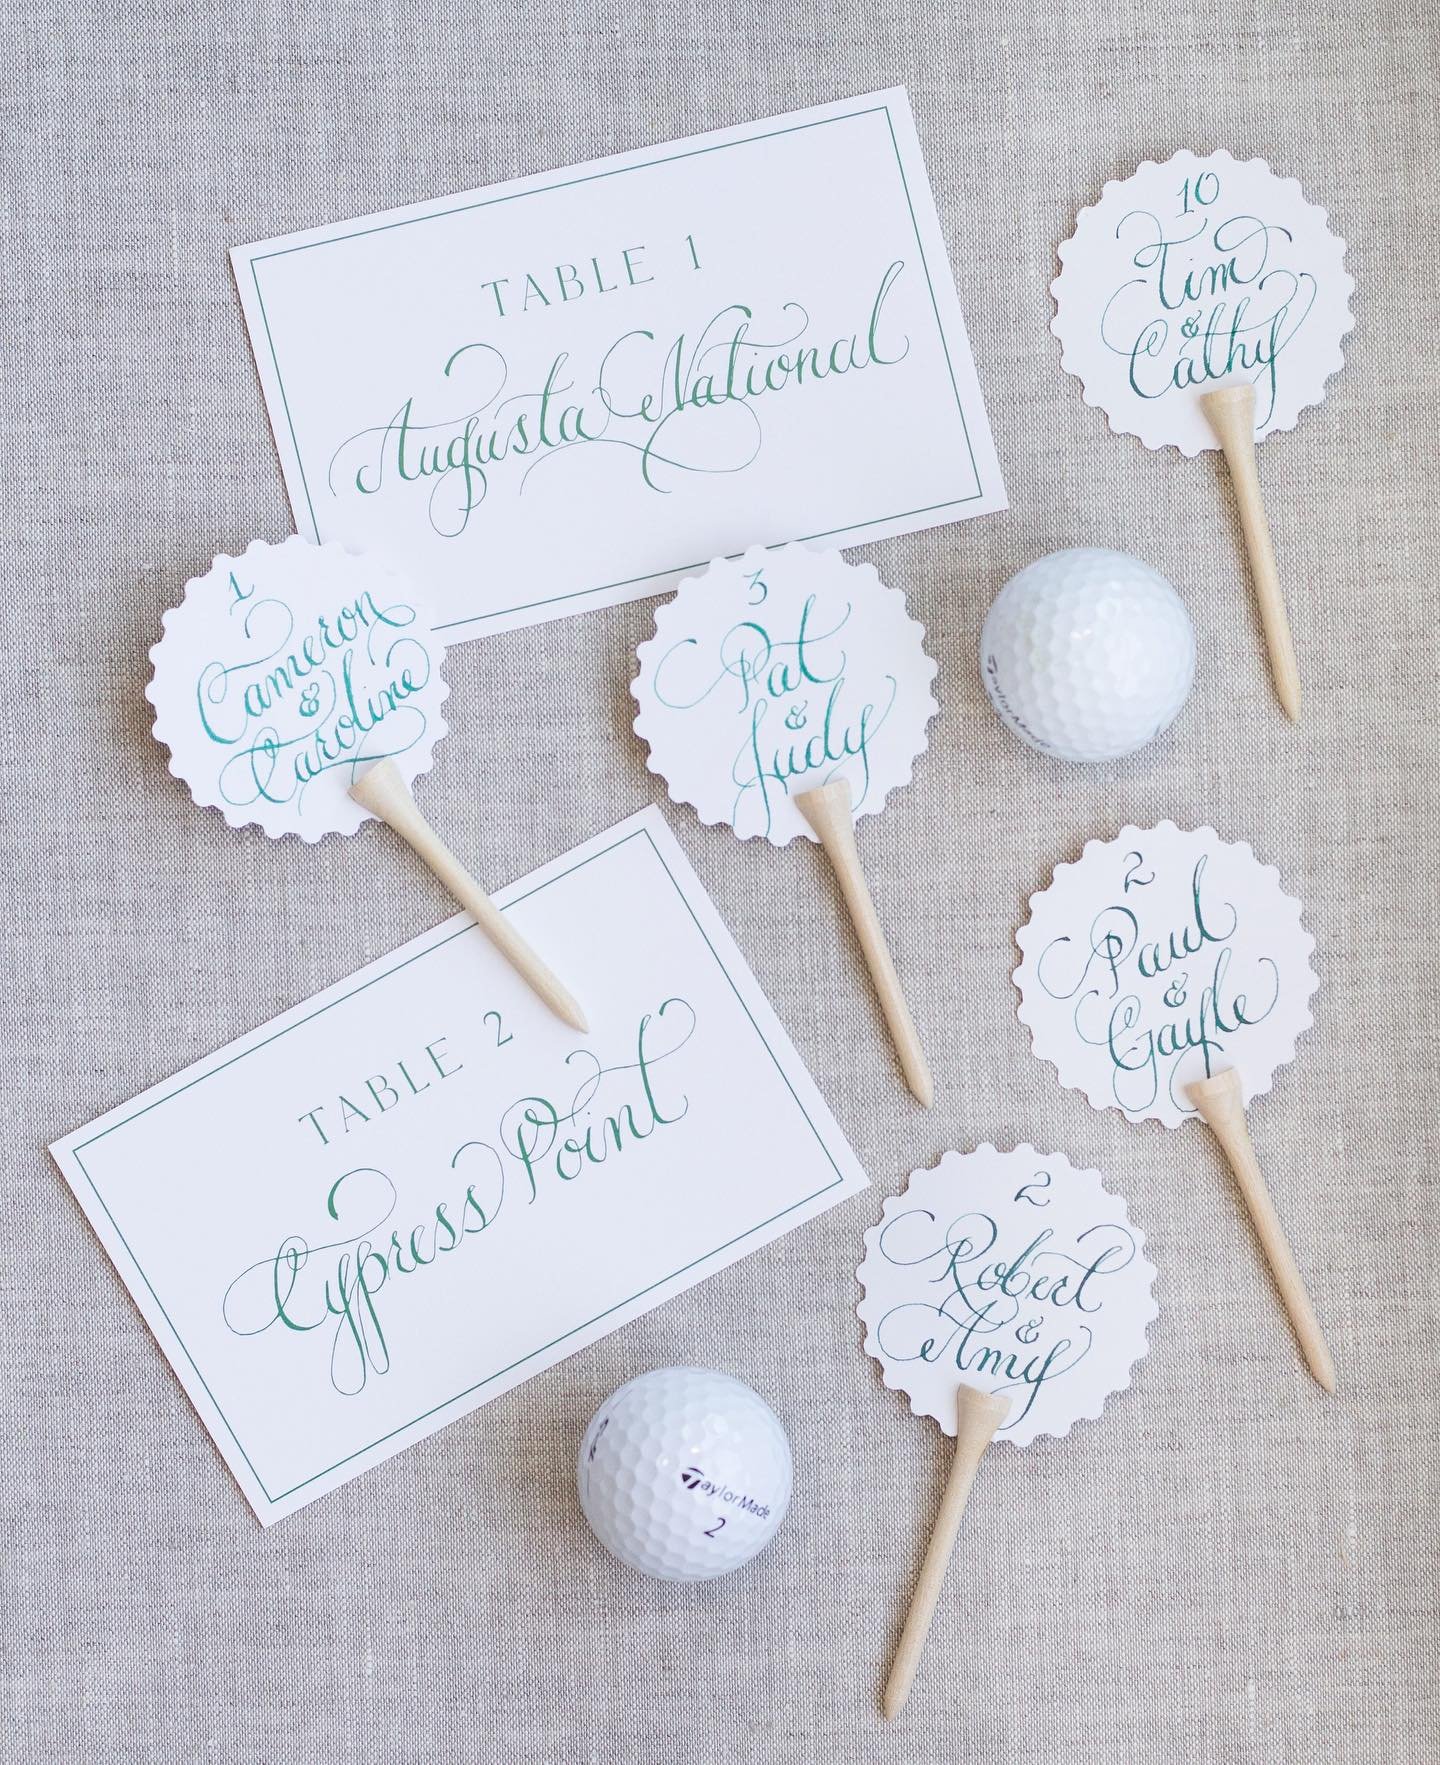 In honor of the Masters ⛳️ we are throwing it back to Caroline and Cameron&rsquo;s custom seating cards and table numbers. The cards were teed up perfectly as guests arrived to the dinner honoring the soon to be newlyweds! 🤍 We are all for an intera